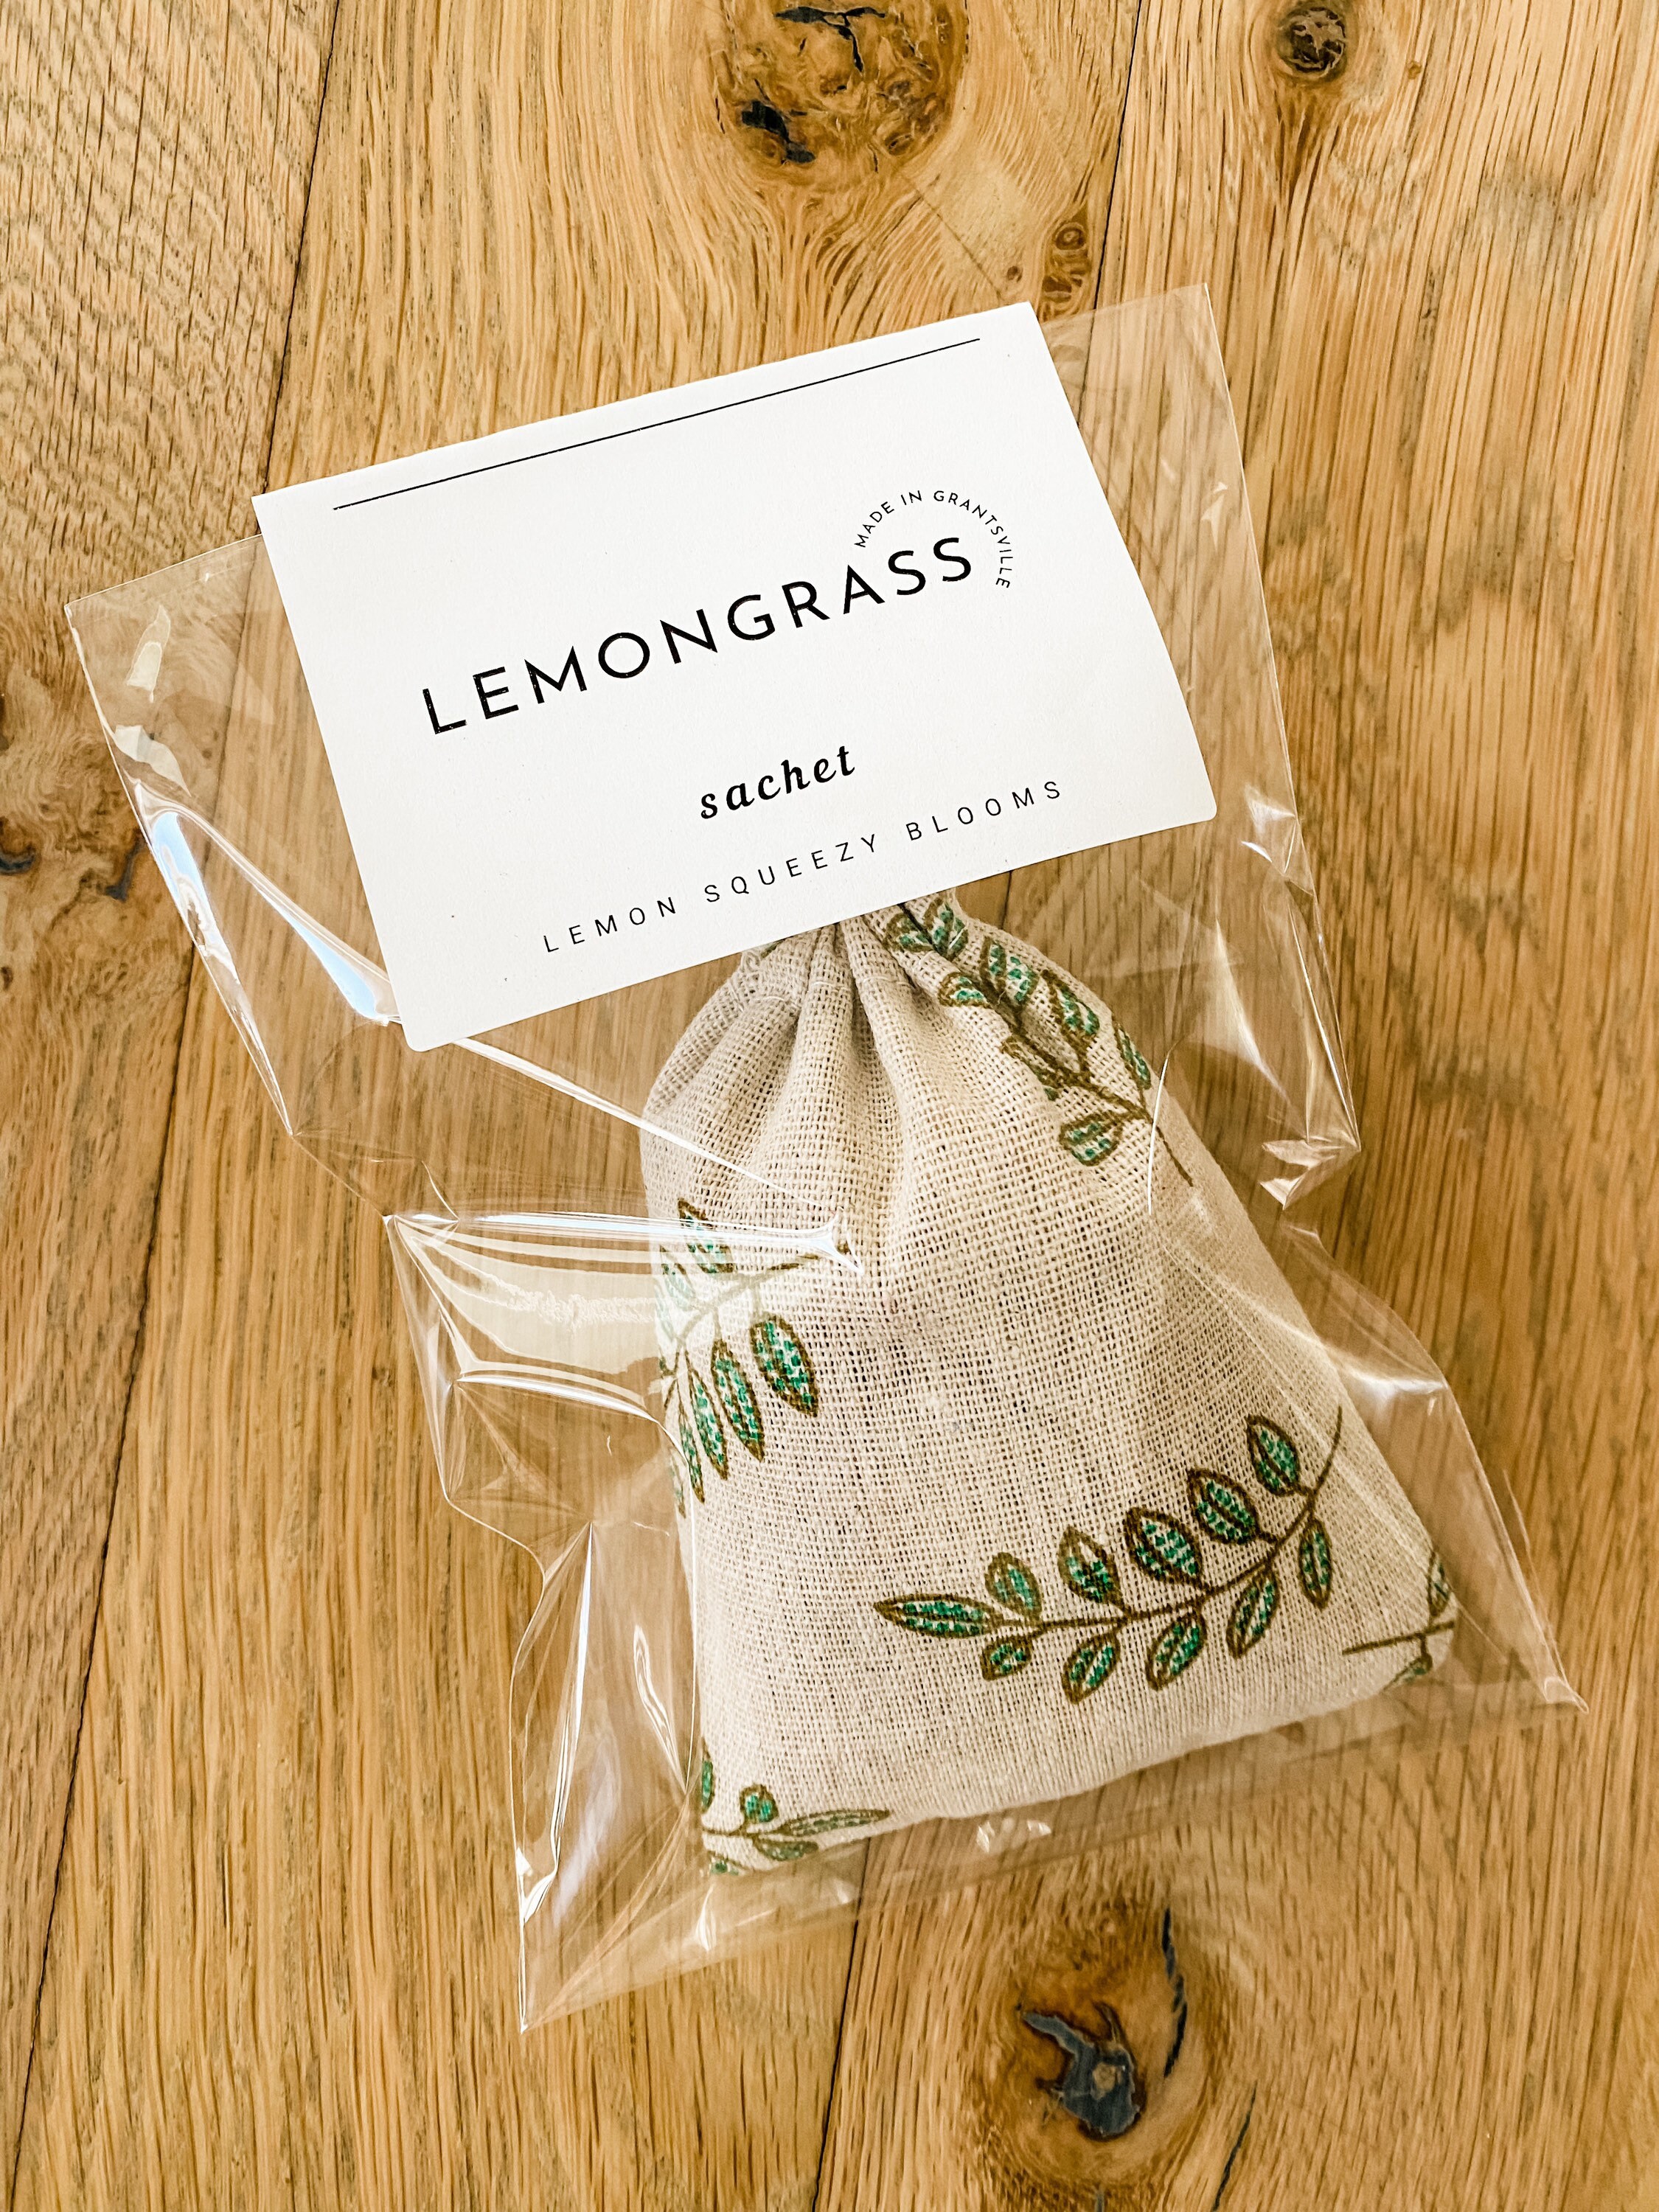 Aroma Beads Scented Sachet, Car Air Freshener, Small Room Air